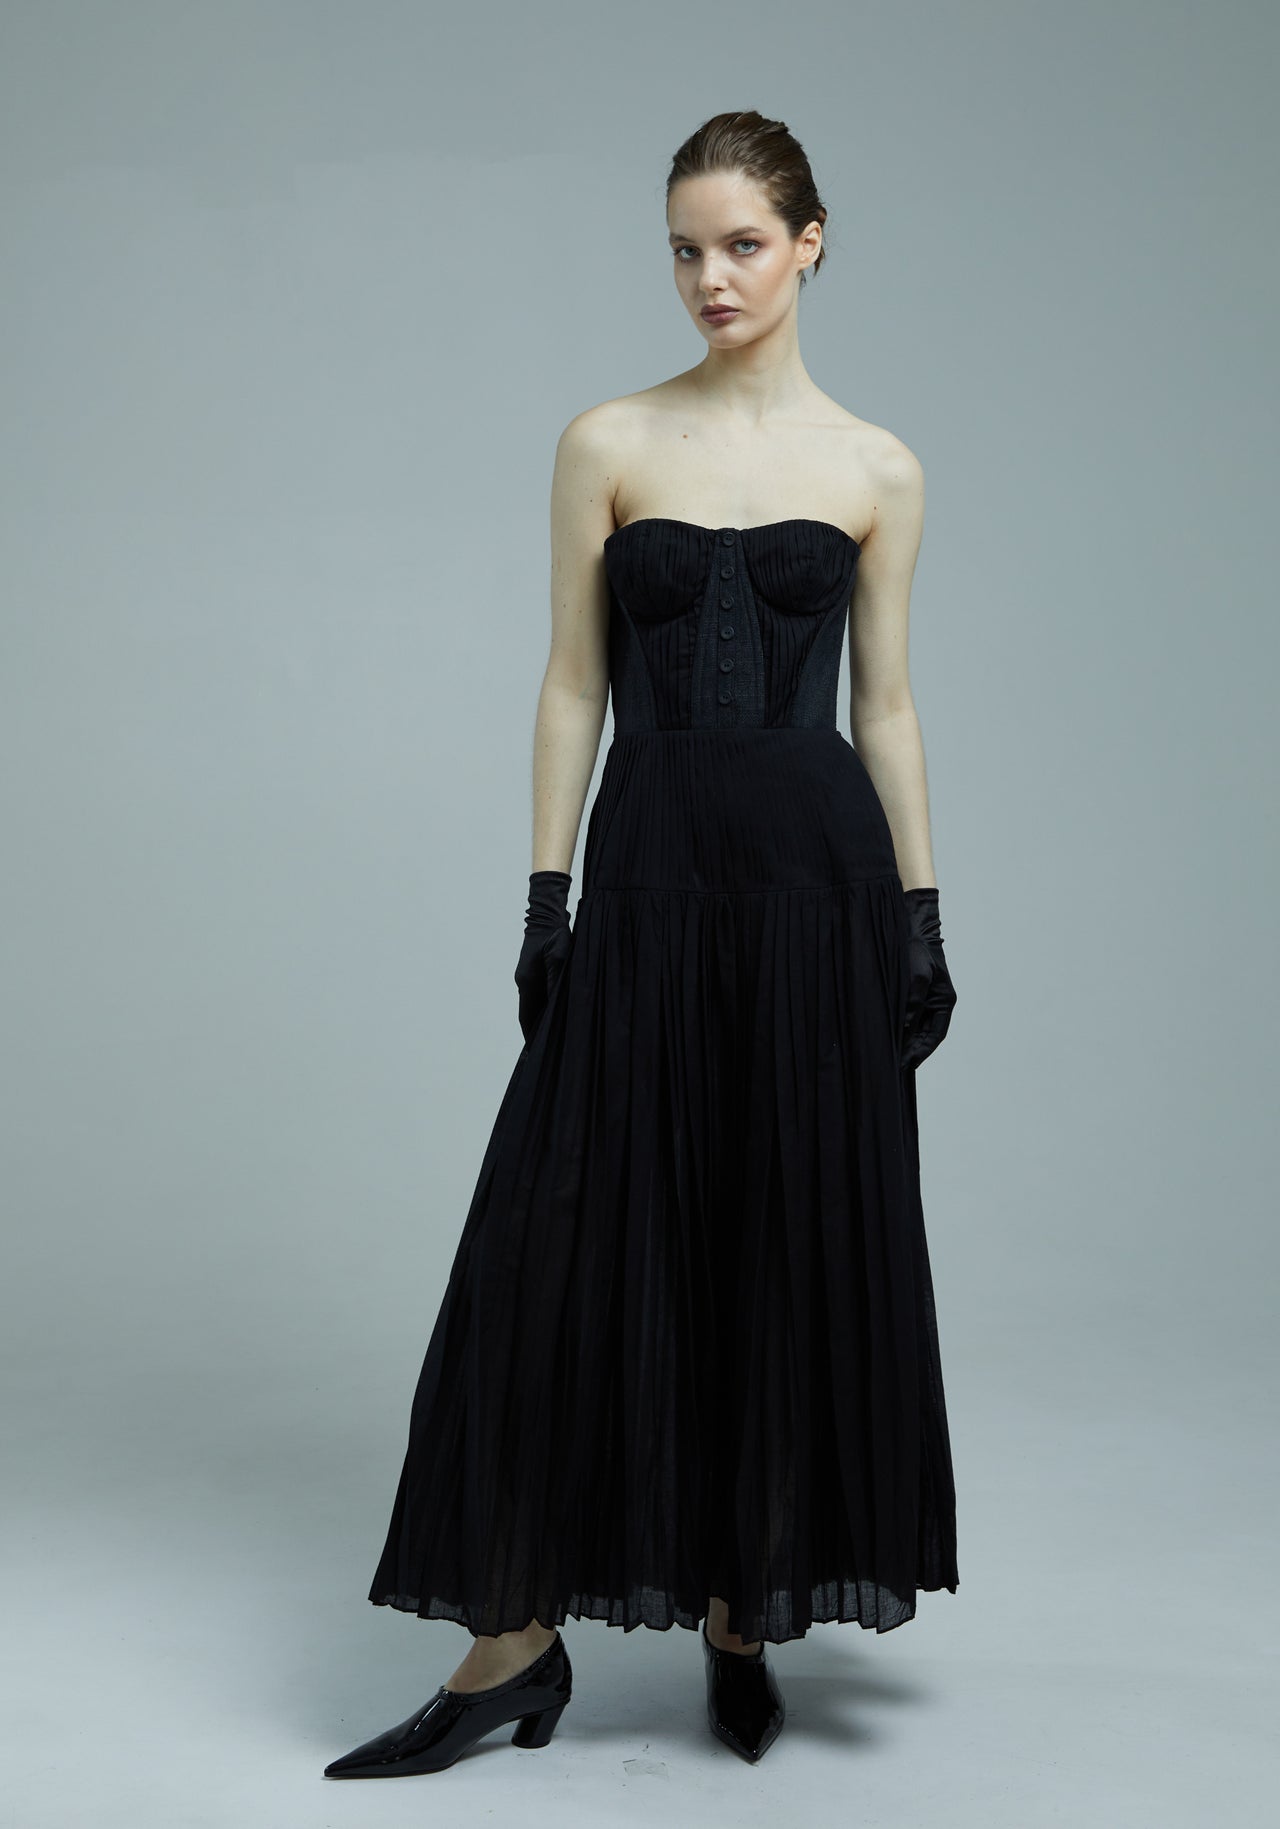 Pleated strapless dress